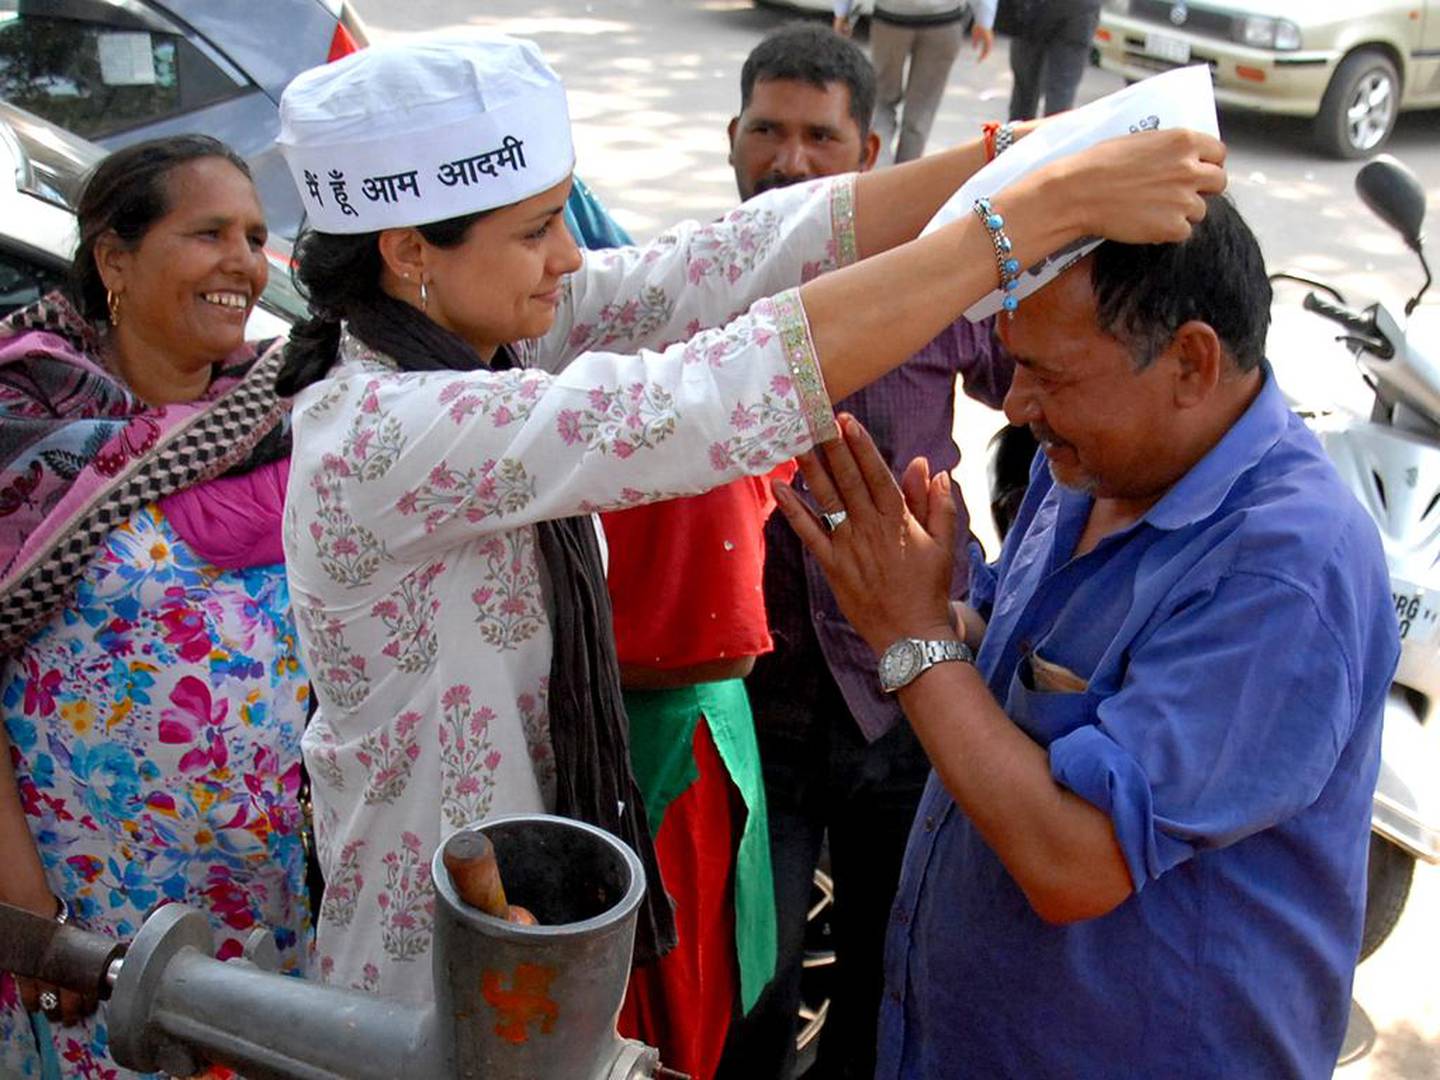 Gul Panag presents a cap to a street vendor as she campaigns before the national elections in Chandigarh in 2014. AFP